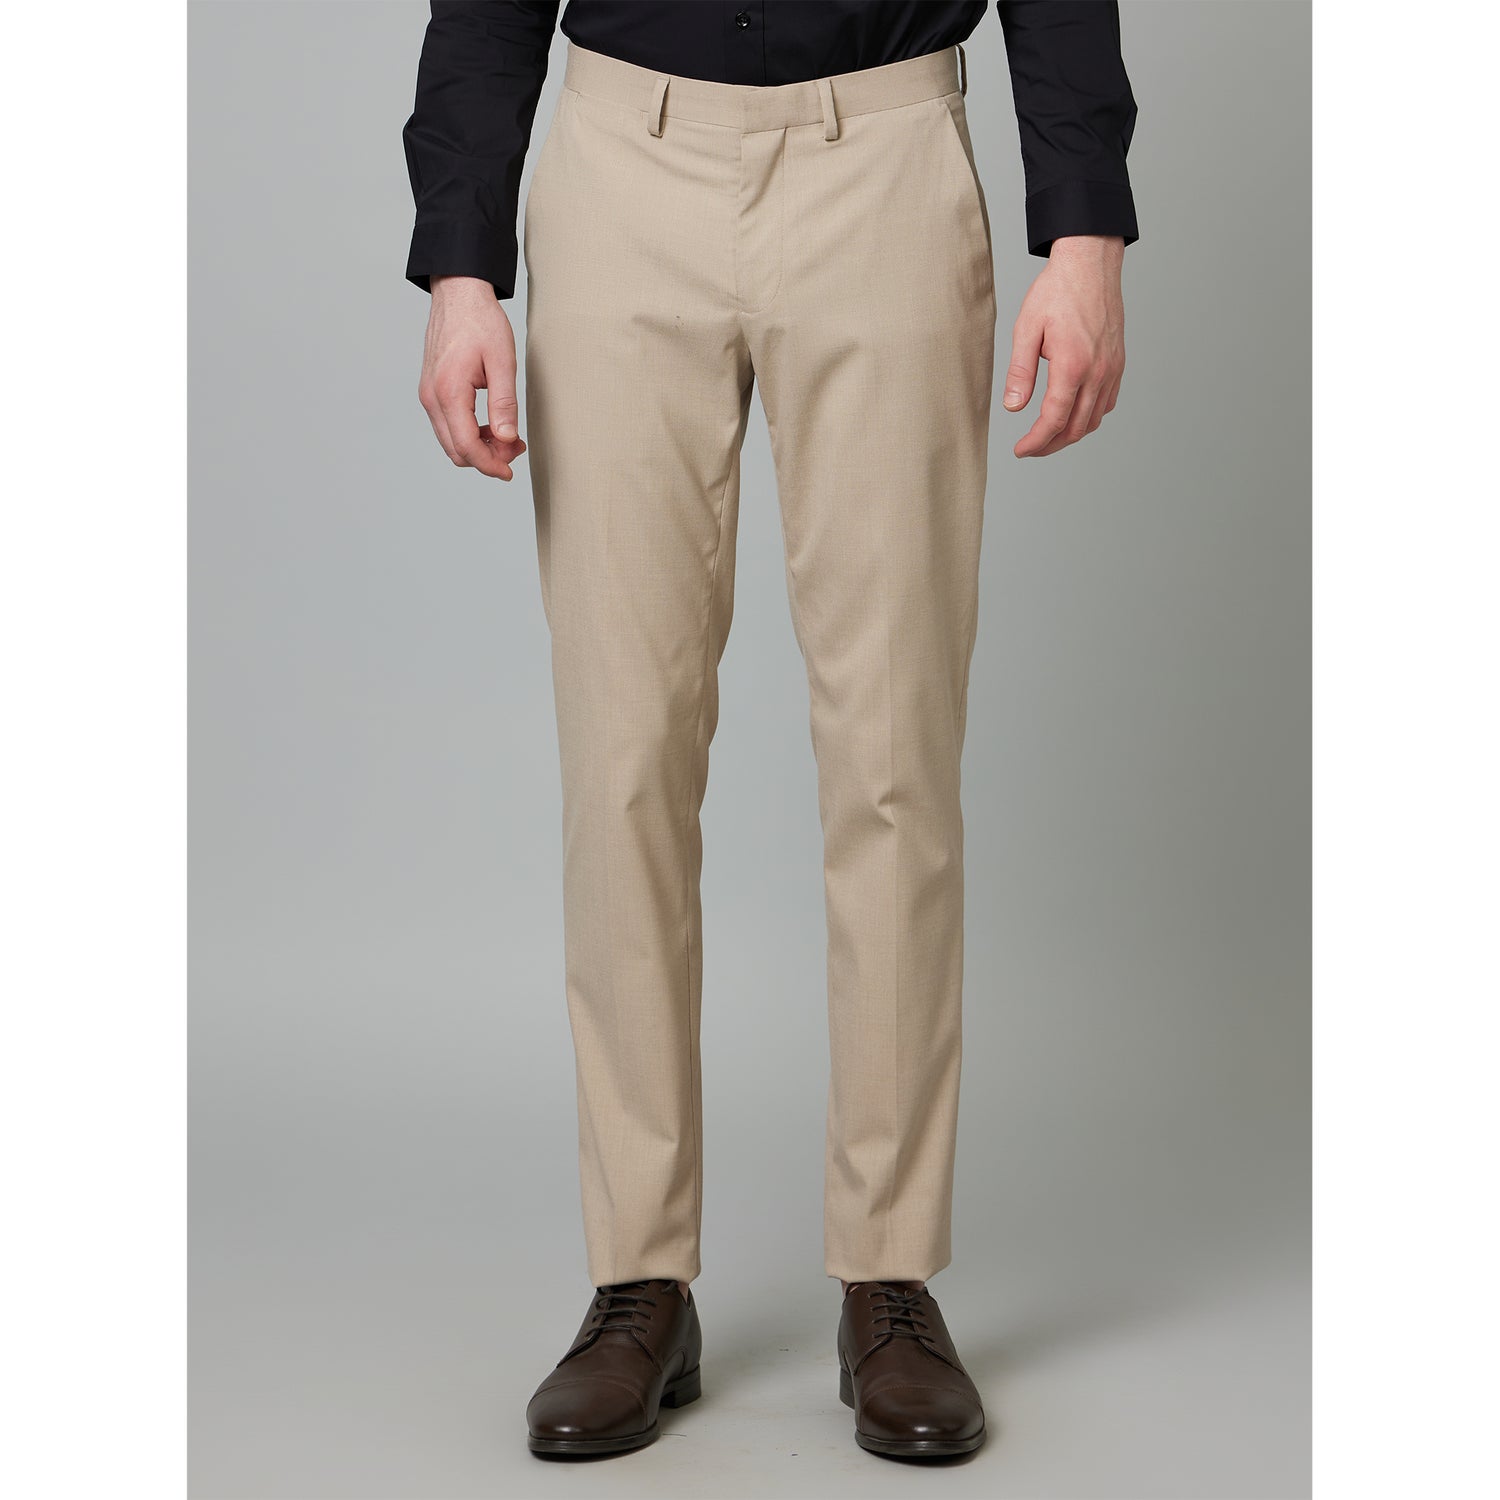 Beige Colored Mid-Rise Slim Fit Formal Trousers (BOAMAURY1)